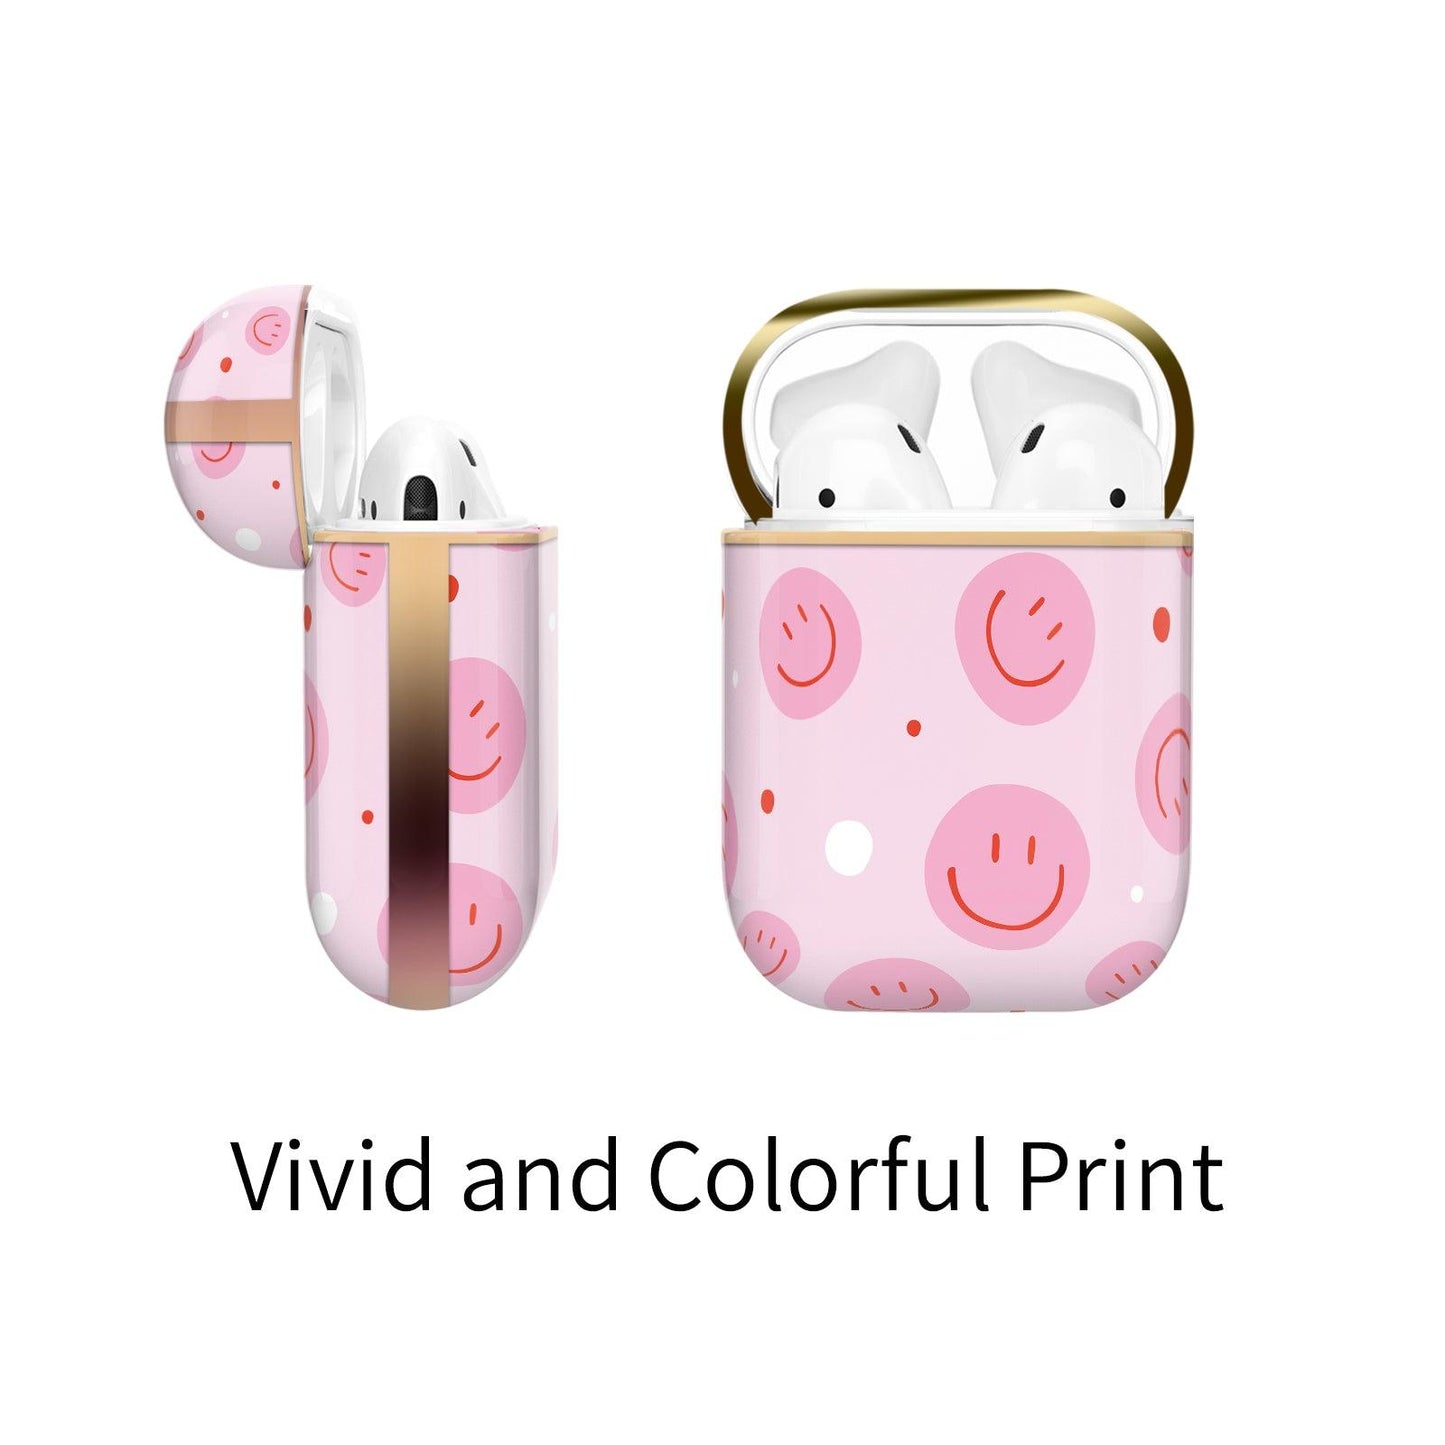 AirPods 1st/ 2nd Generation Contemporary Cover, Pink Smiley - Berkin Arts